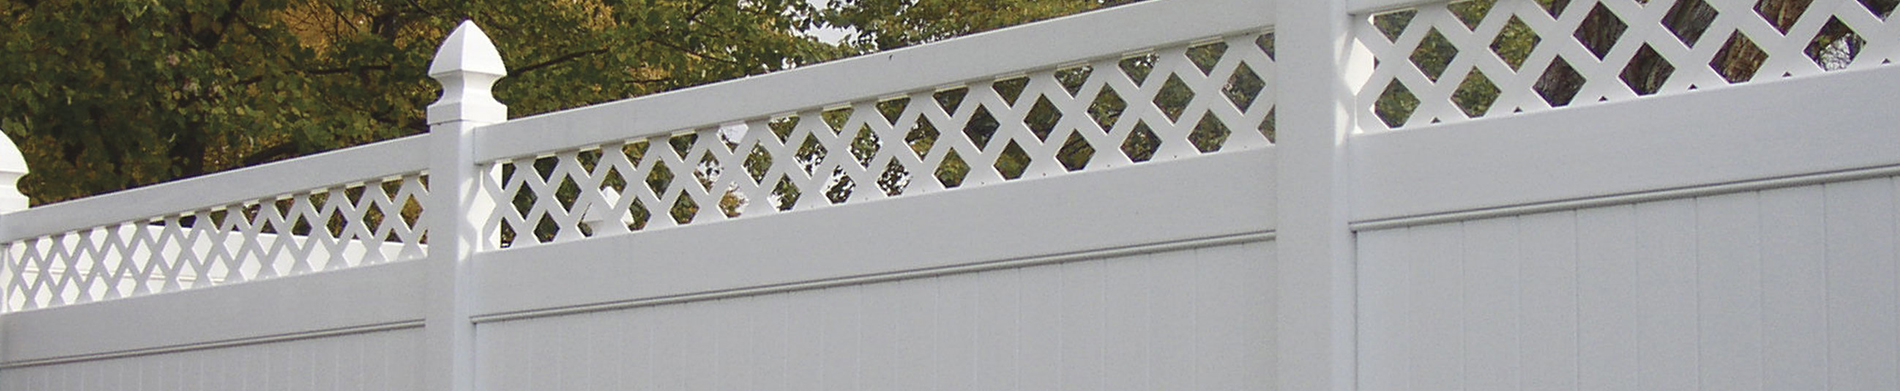 Install USA Made Vinyl Fencing Around Your House